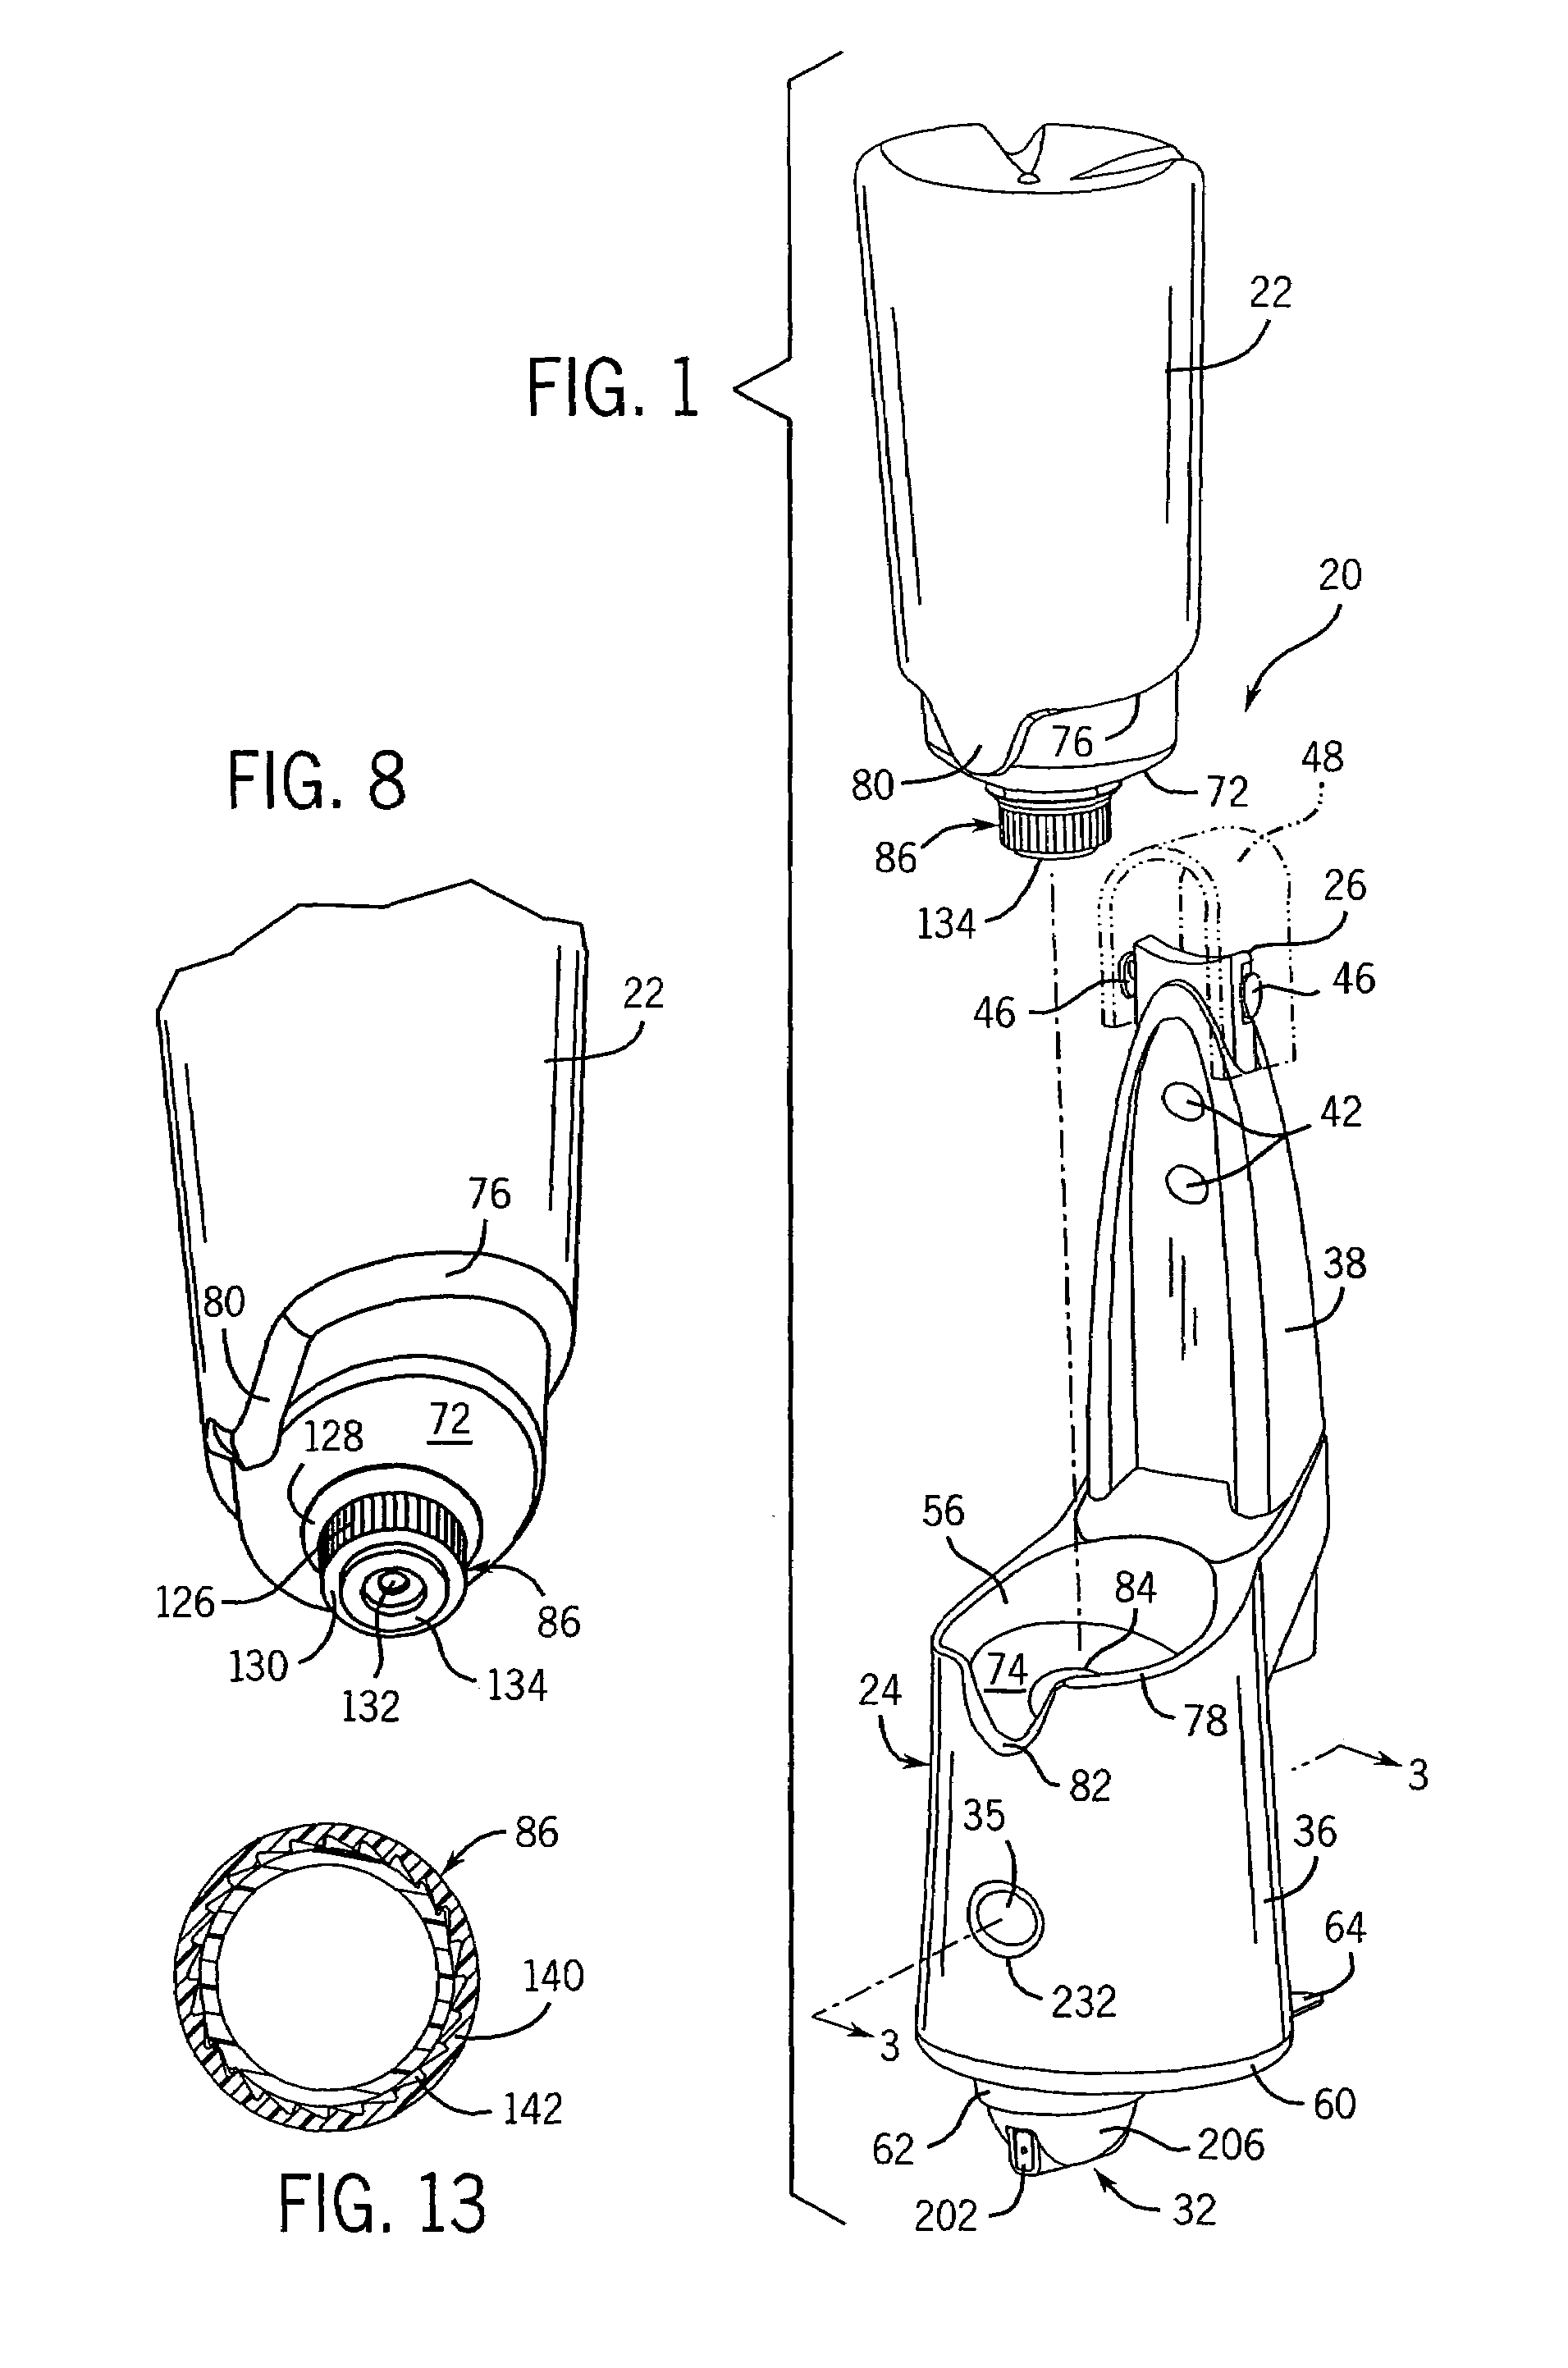 Automated cleansing sprayer having separate cleanser and air vent paths from bottle